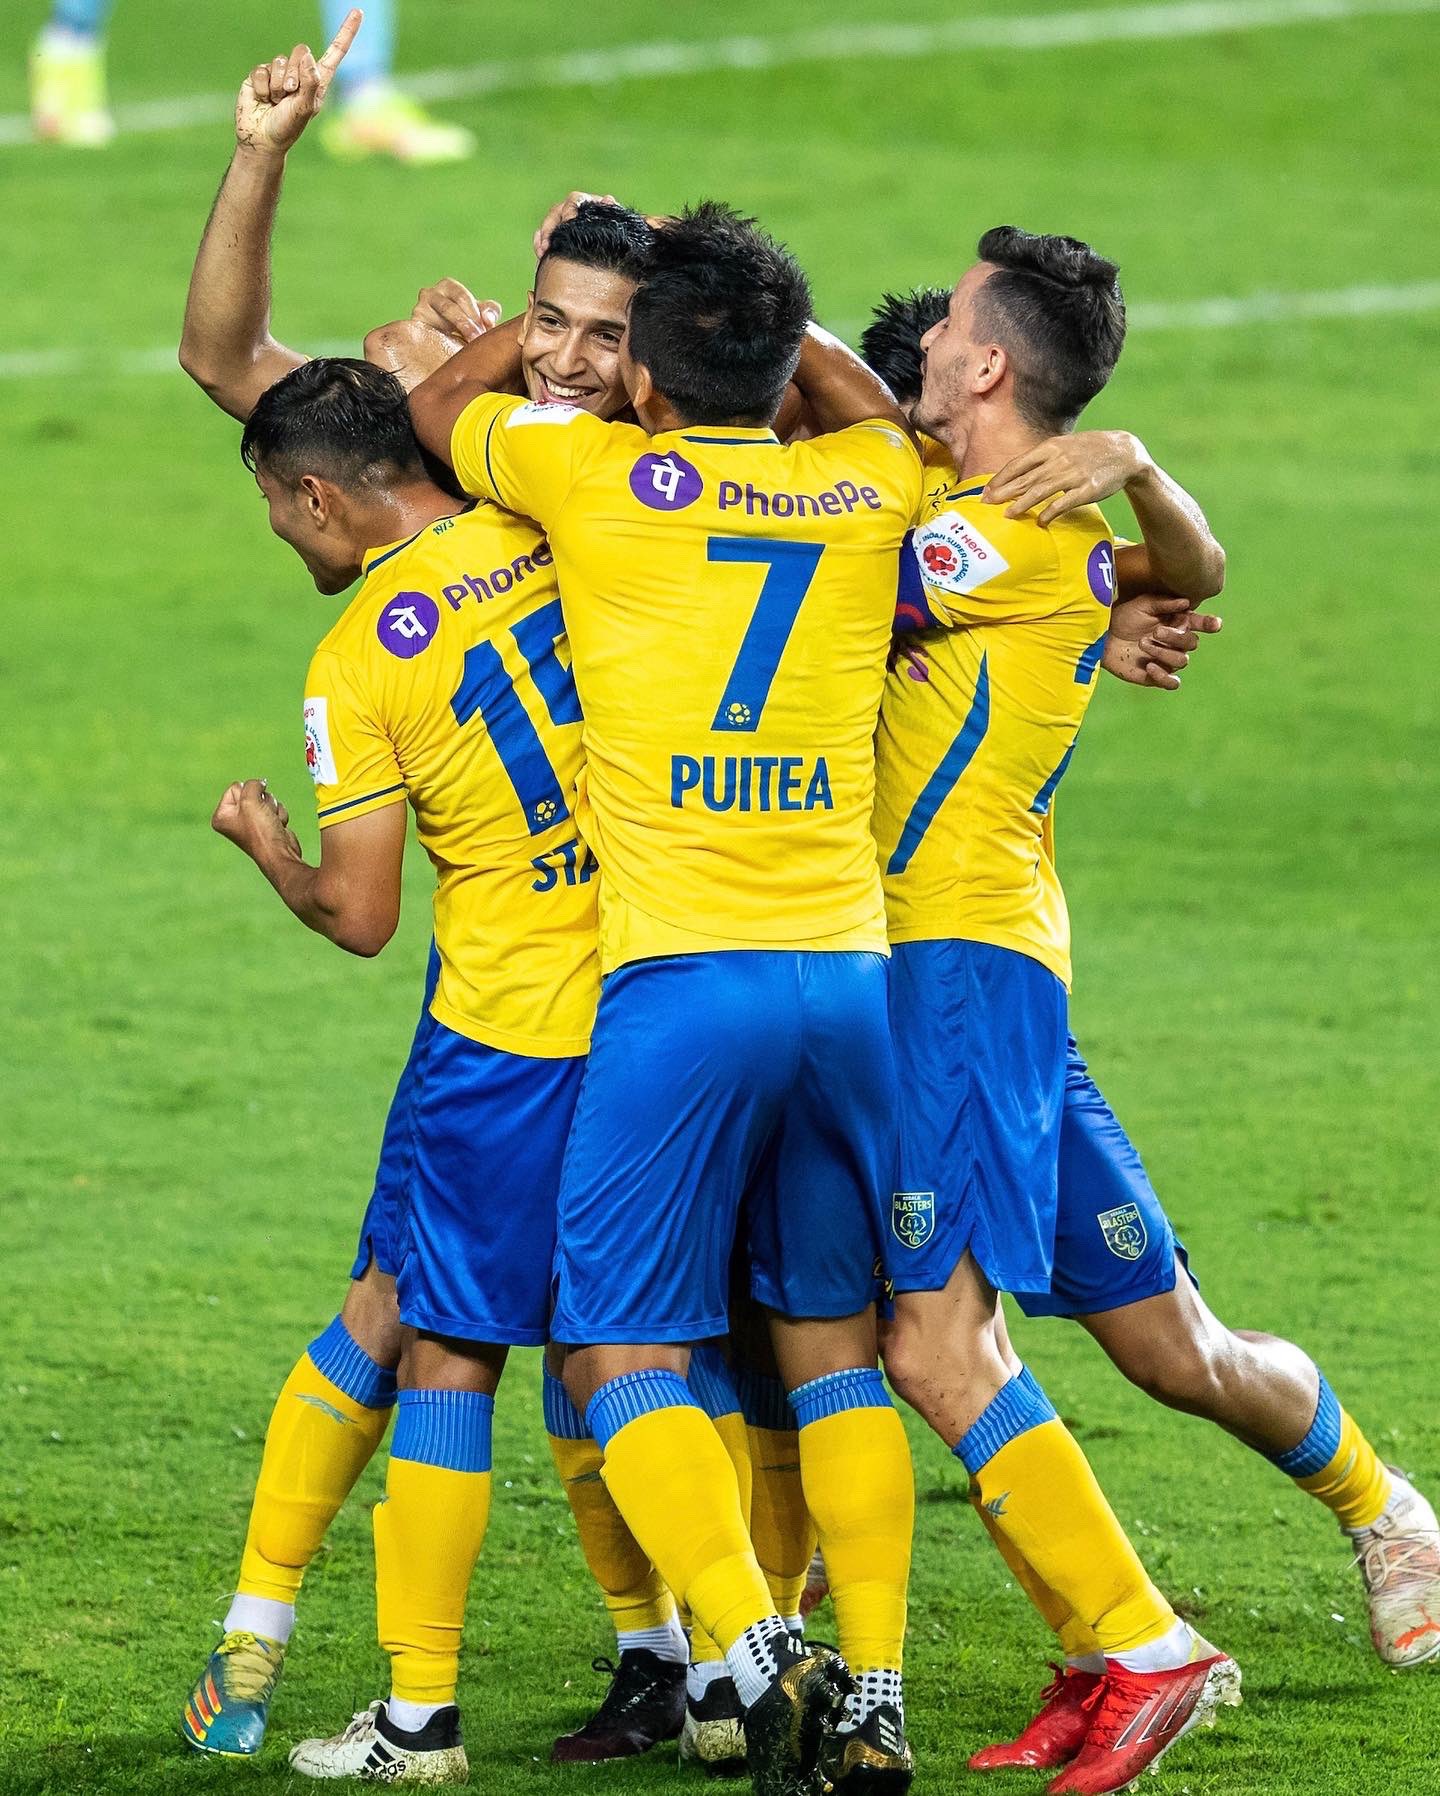 KBFC beat MCFC: Goals from Samad and Alvaro Vazquez help Kerala Blasters FC strengthen their playoffs hopes with a commanding win over Mumbai City FC